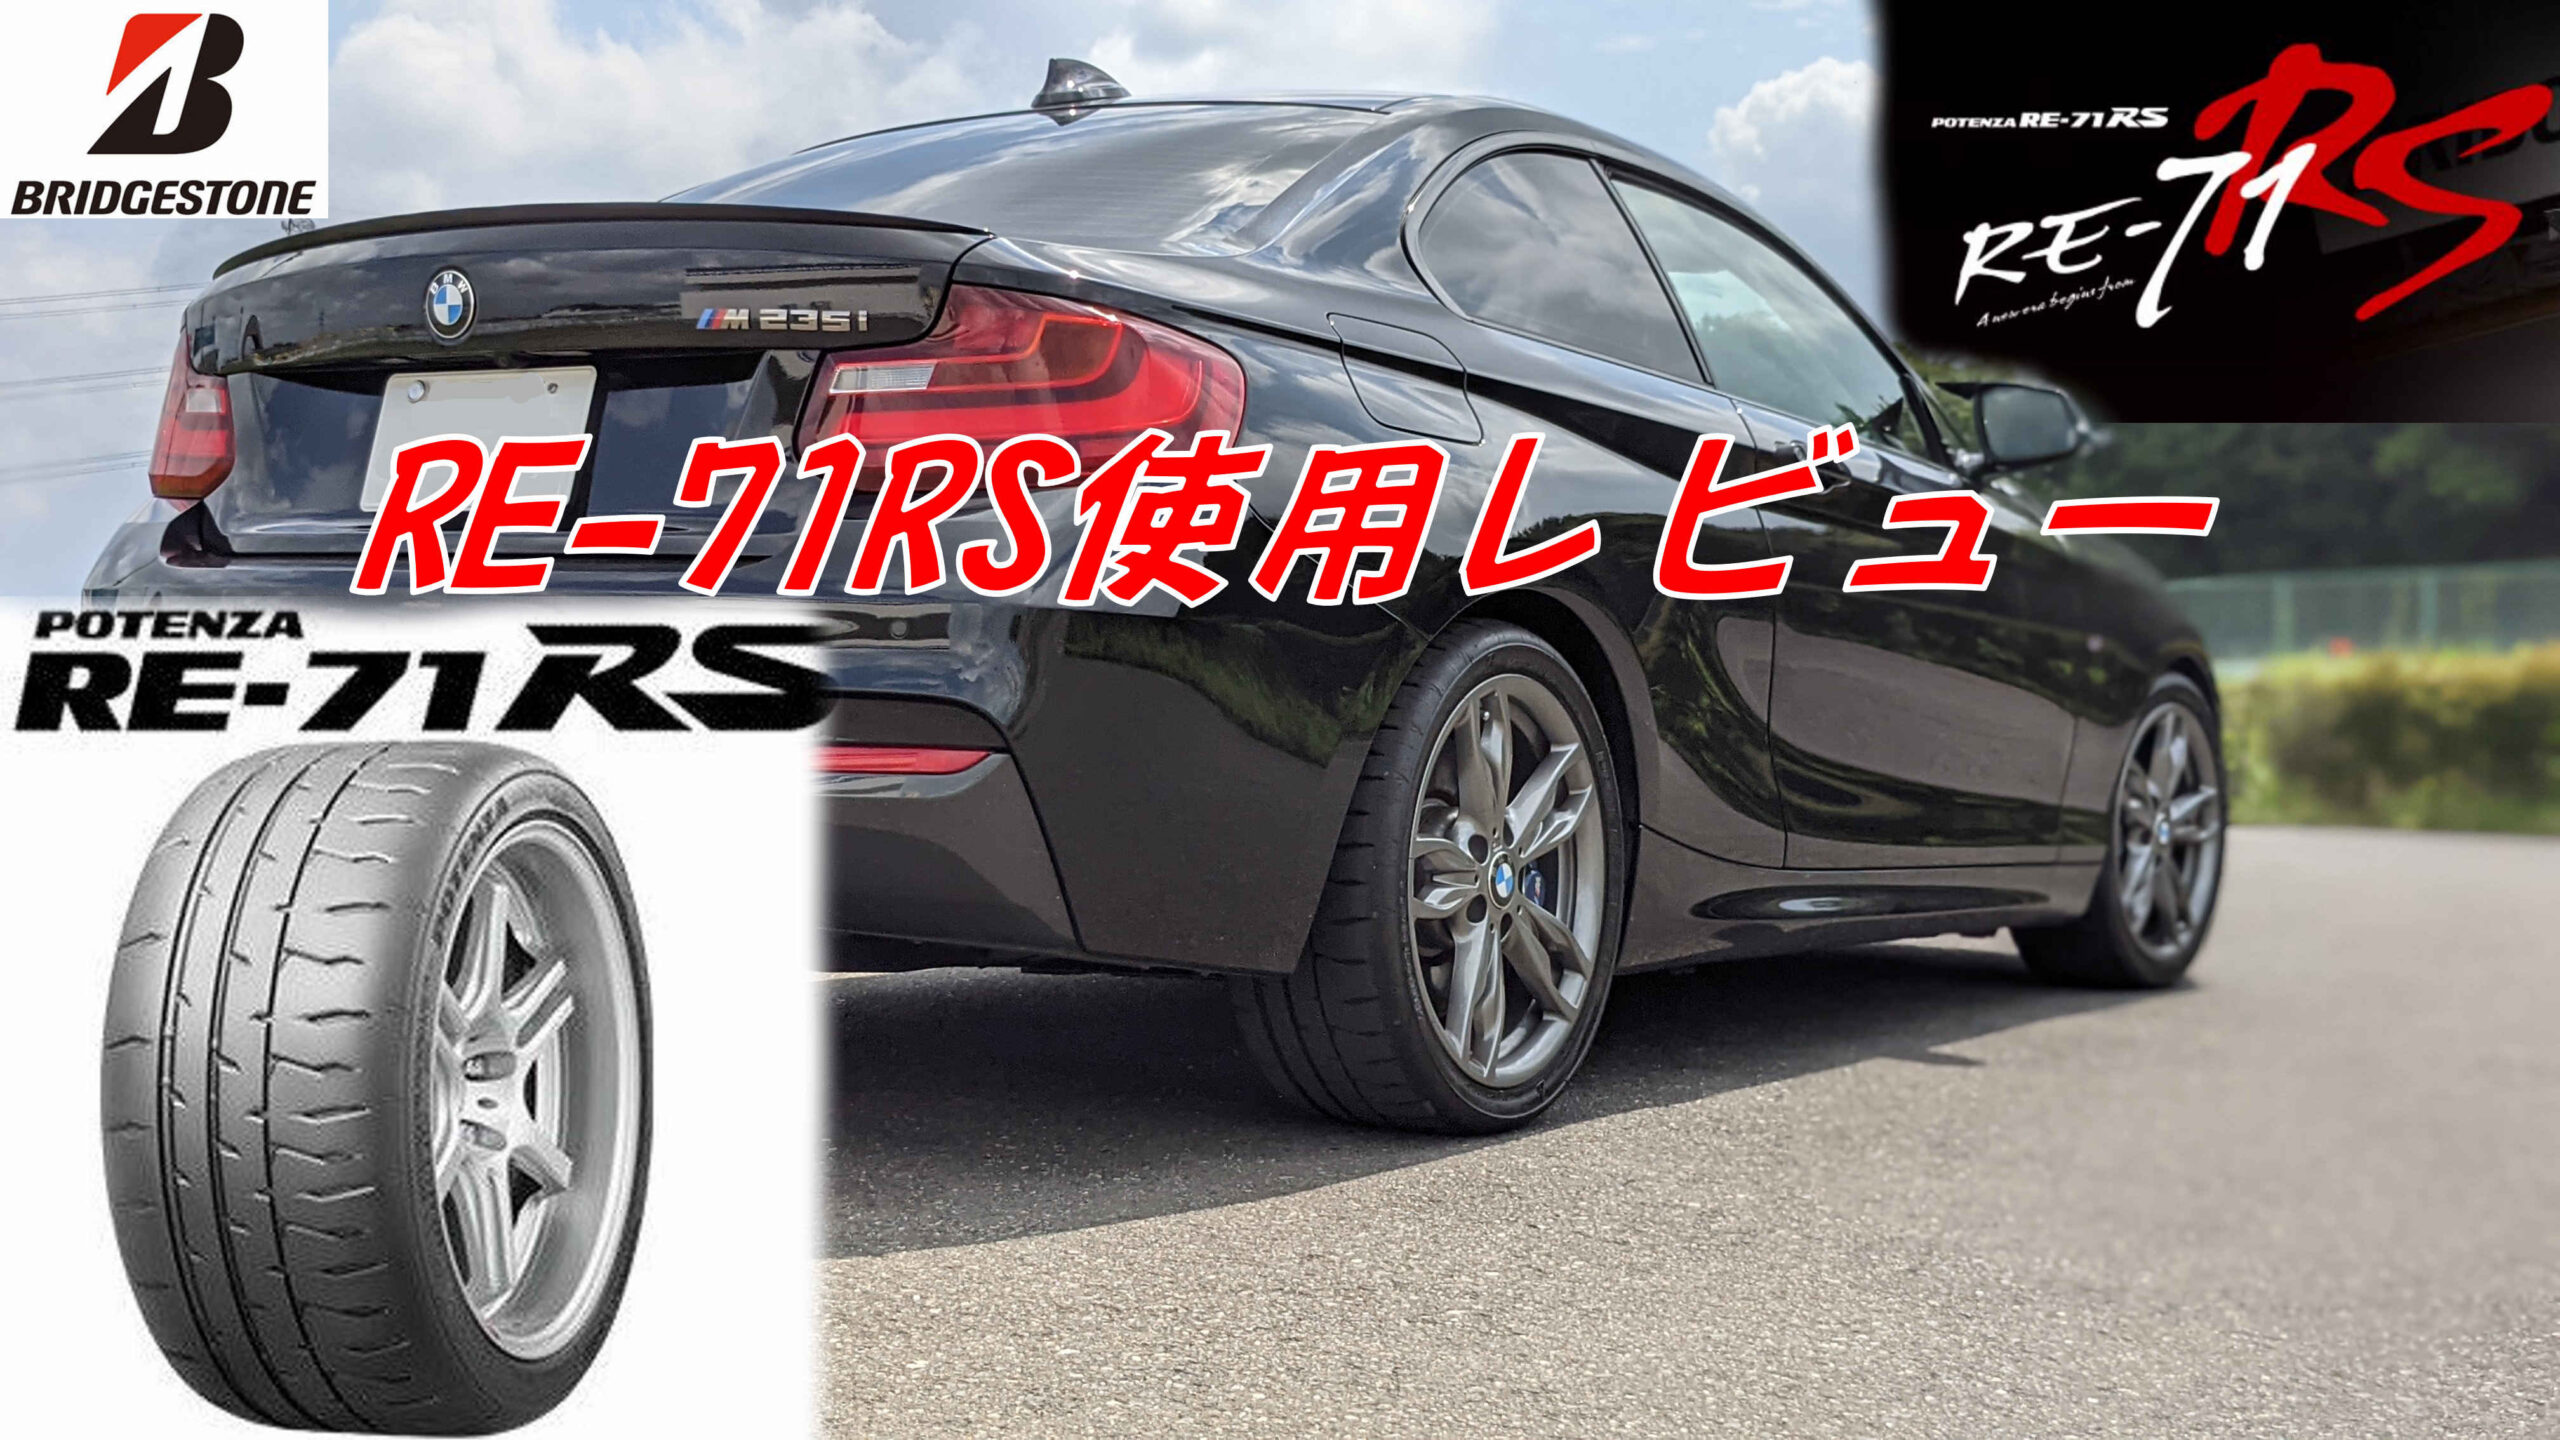 BMW】POTENZA RE-71RS使用レビュー【M235i】 | バイクとクルマと・・・